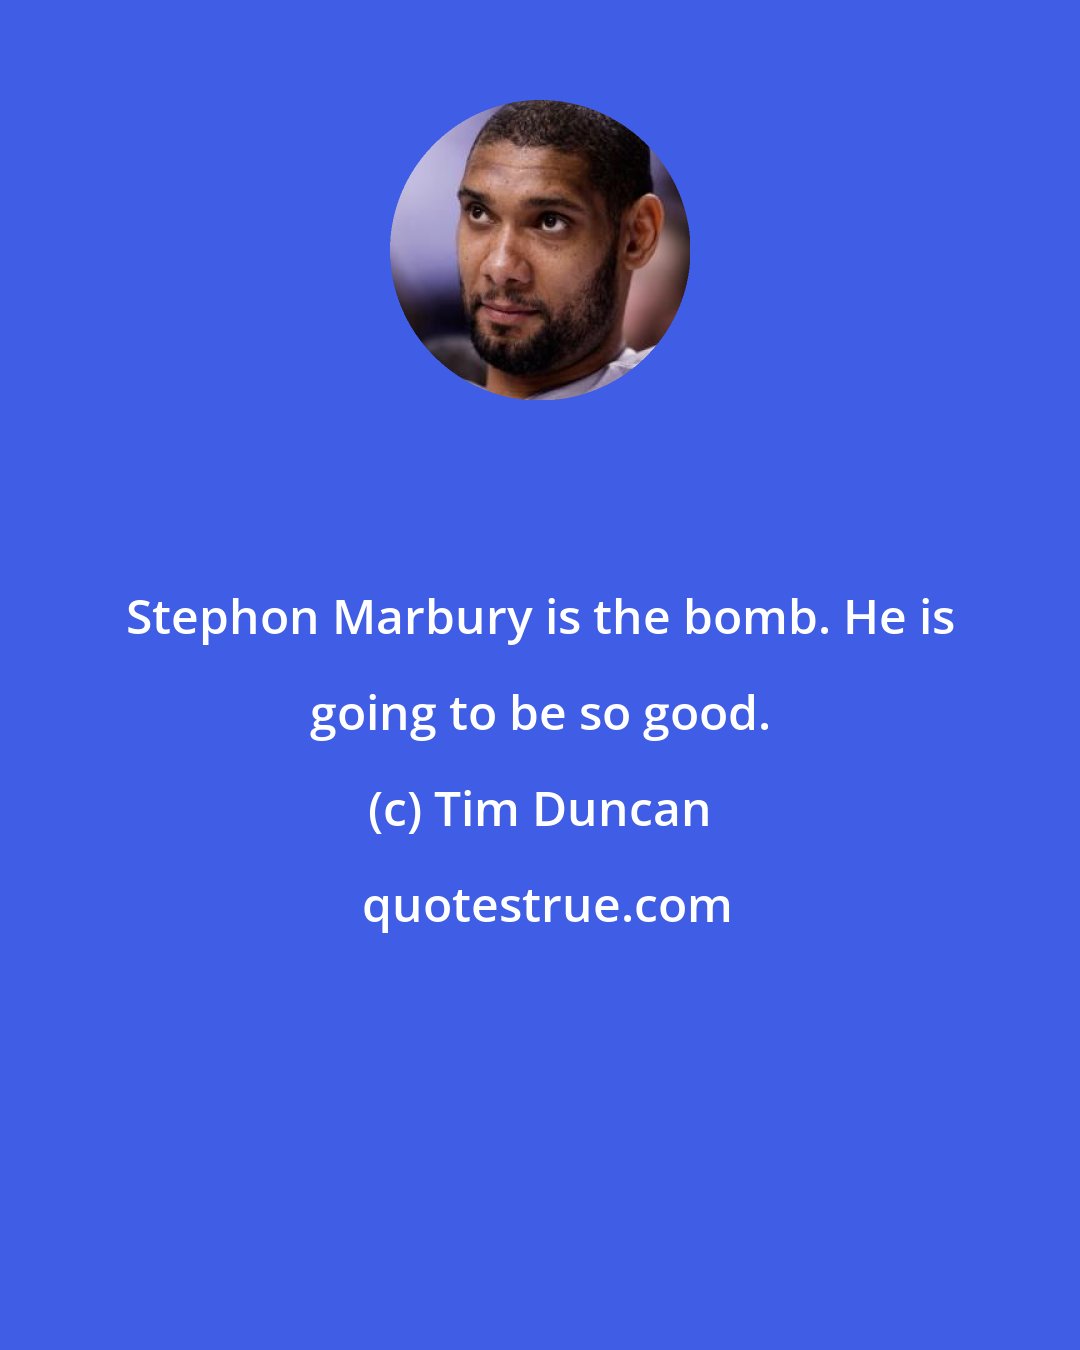 Tim Duncan: Stephon Marbury is the bomb. He is going to be so good.